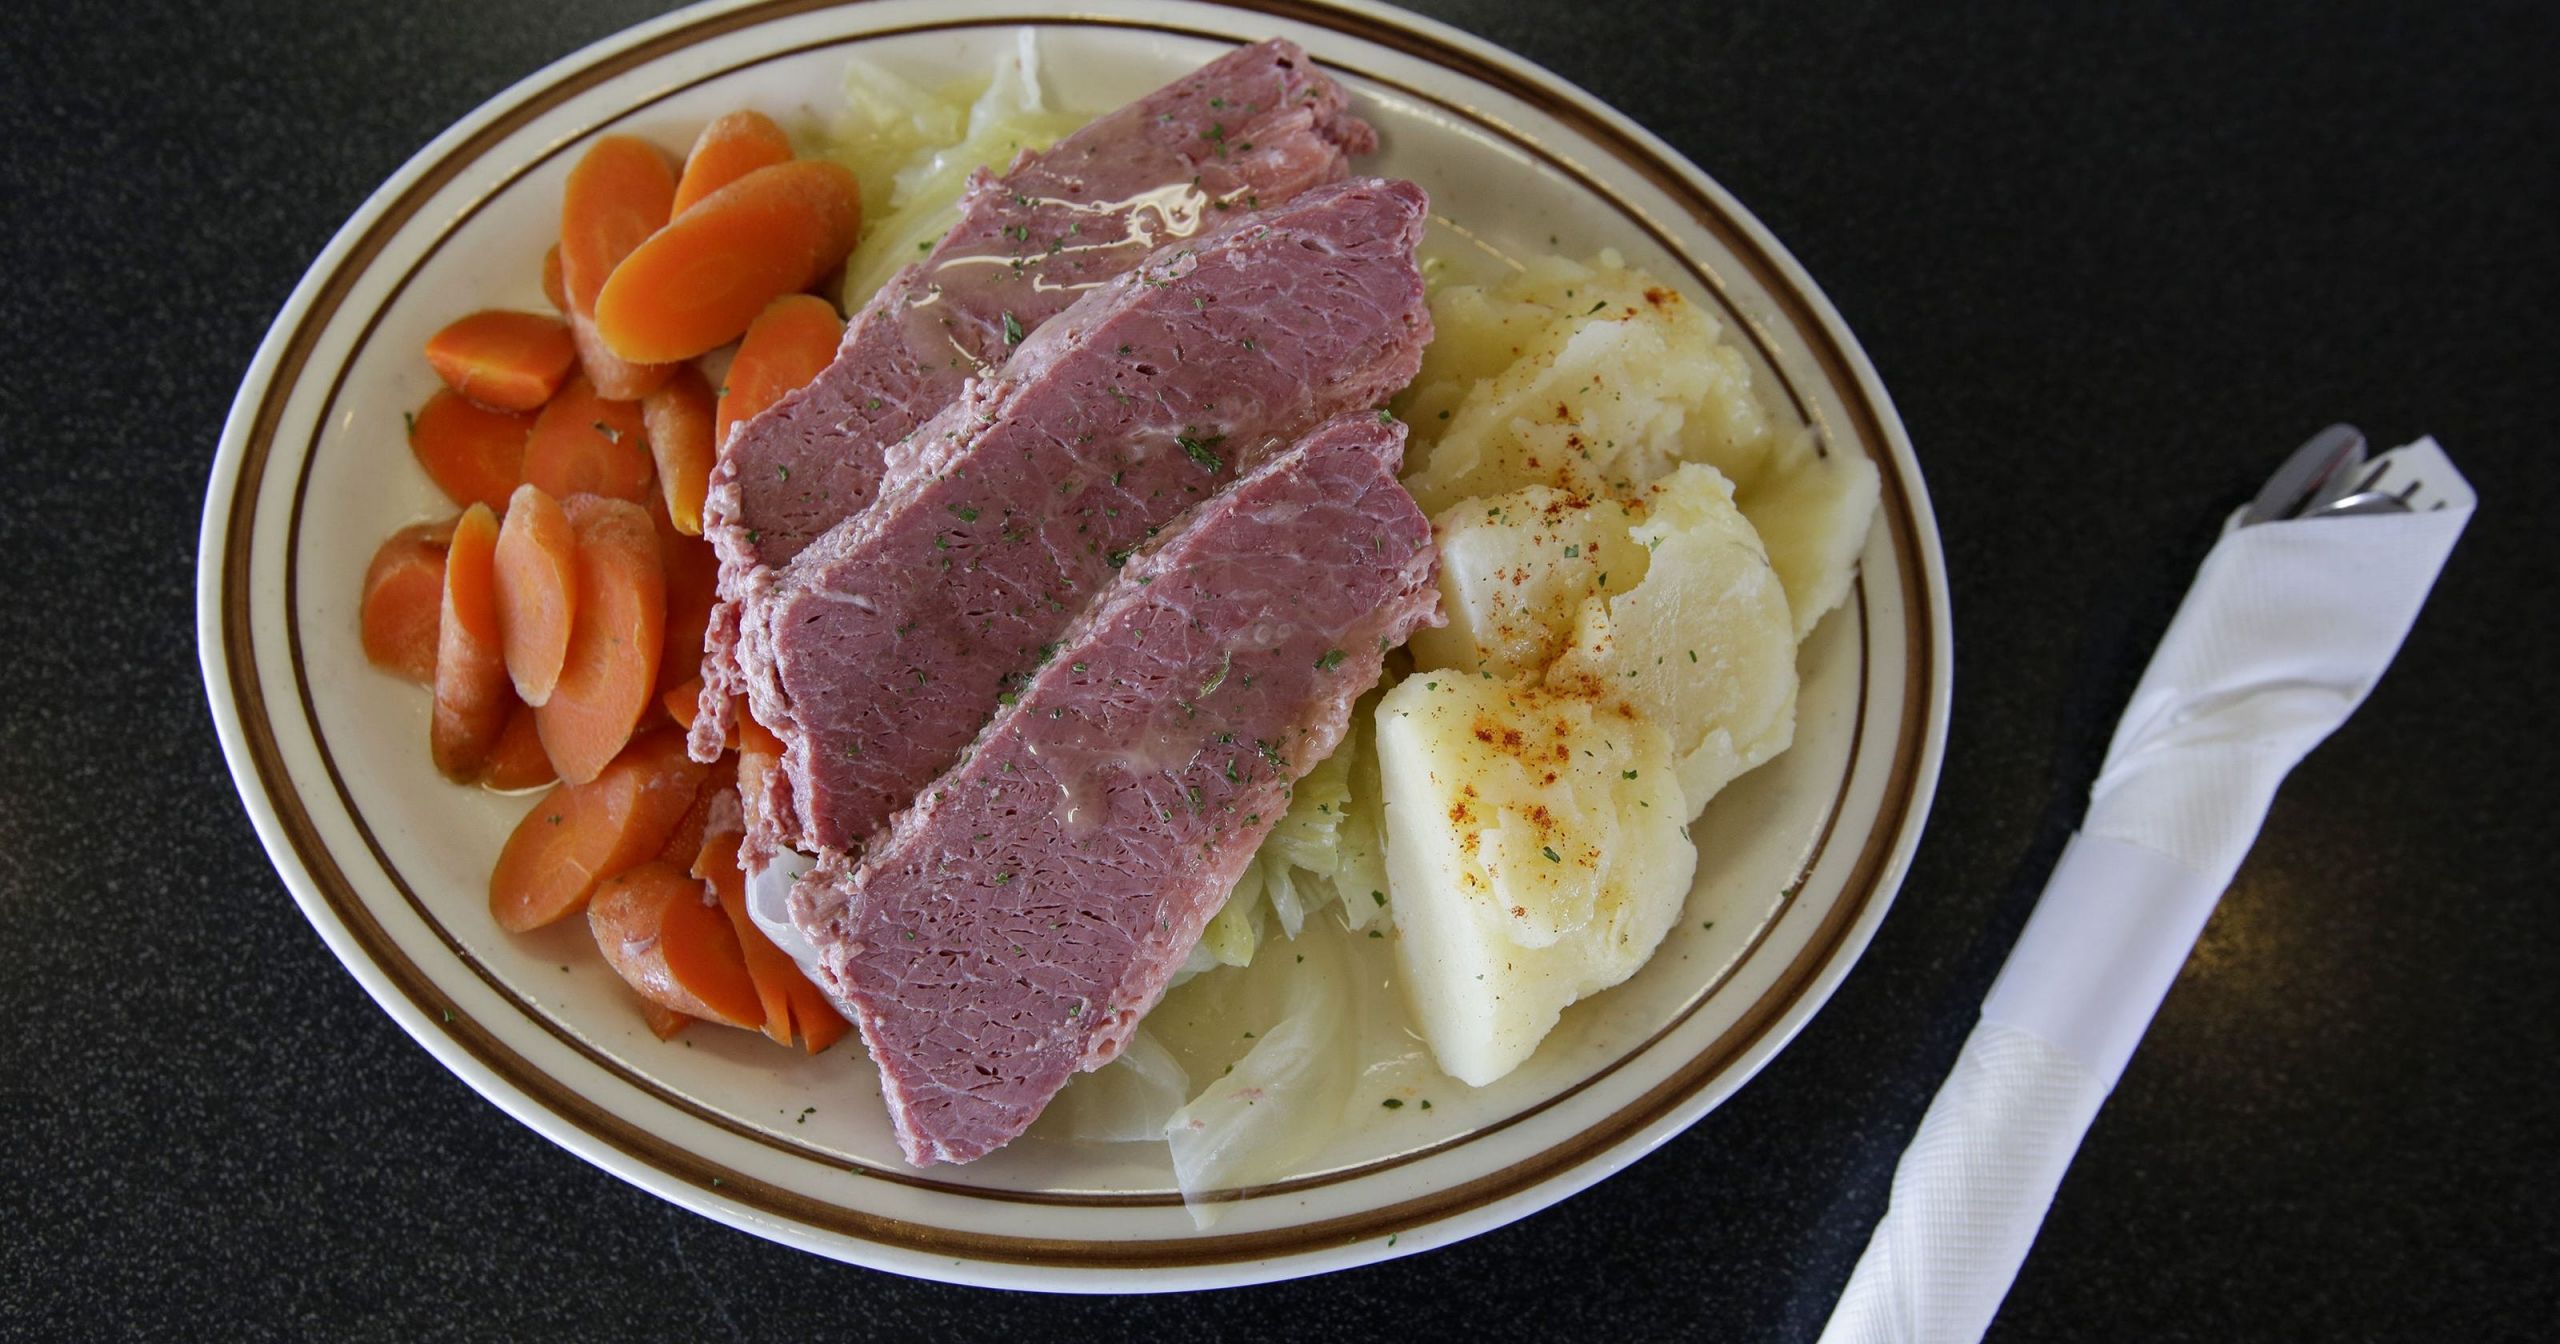 Corned Beef And Cabbage St Patrick'S Day
 Find tasty St Patrick s Day corned beef here